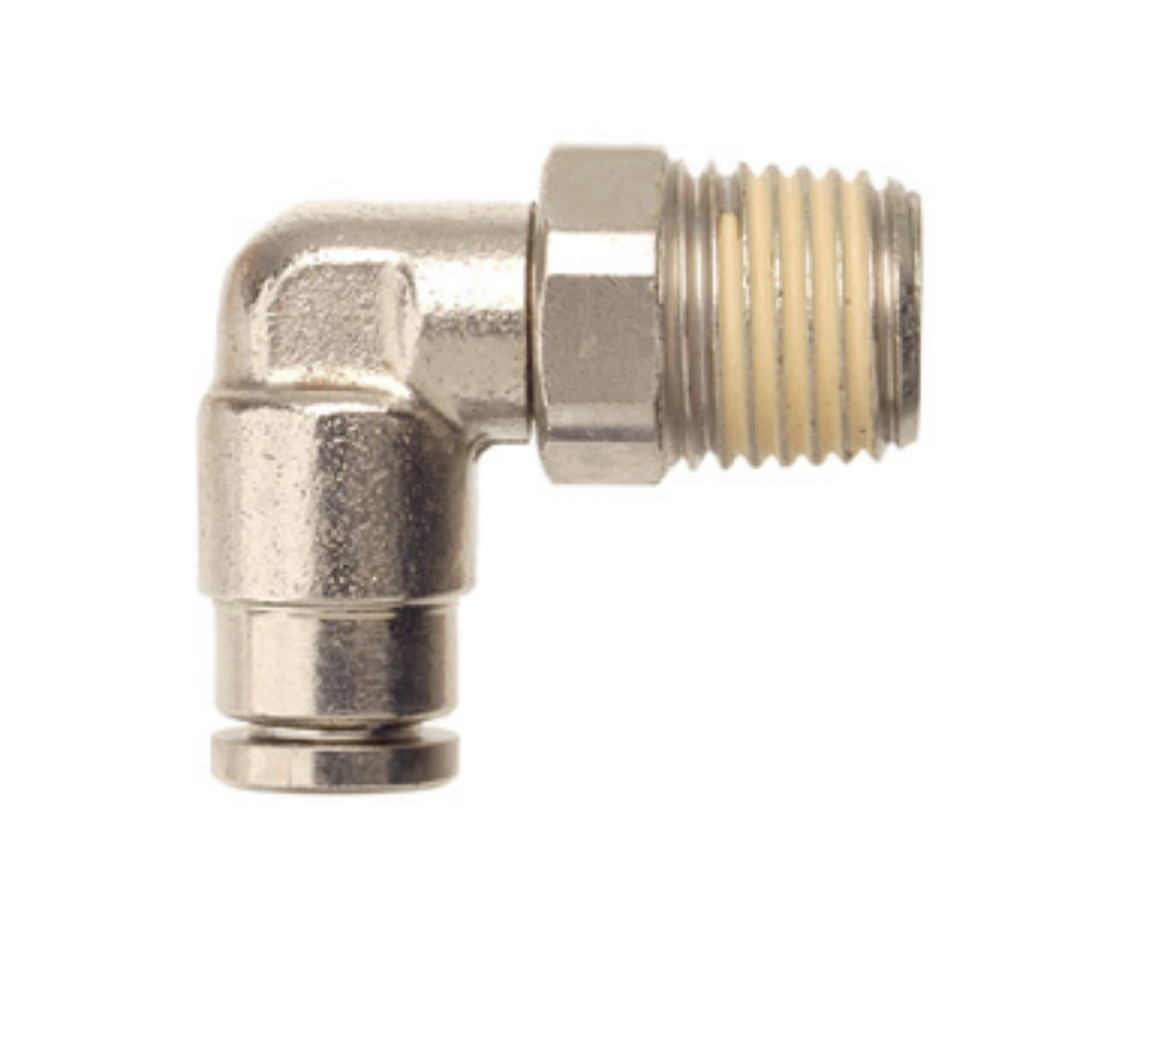 Picture of QFM5NP 8mmx1/4 MI BSPT Swivel Elbow Nickel Plated